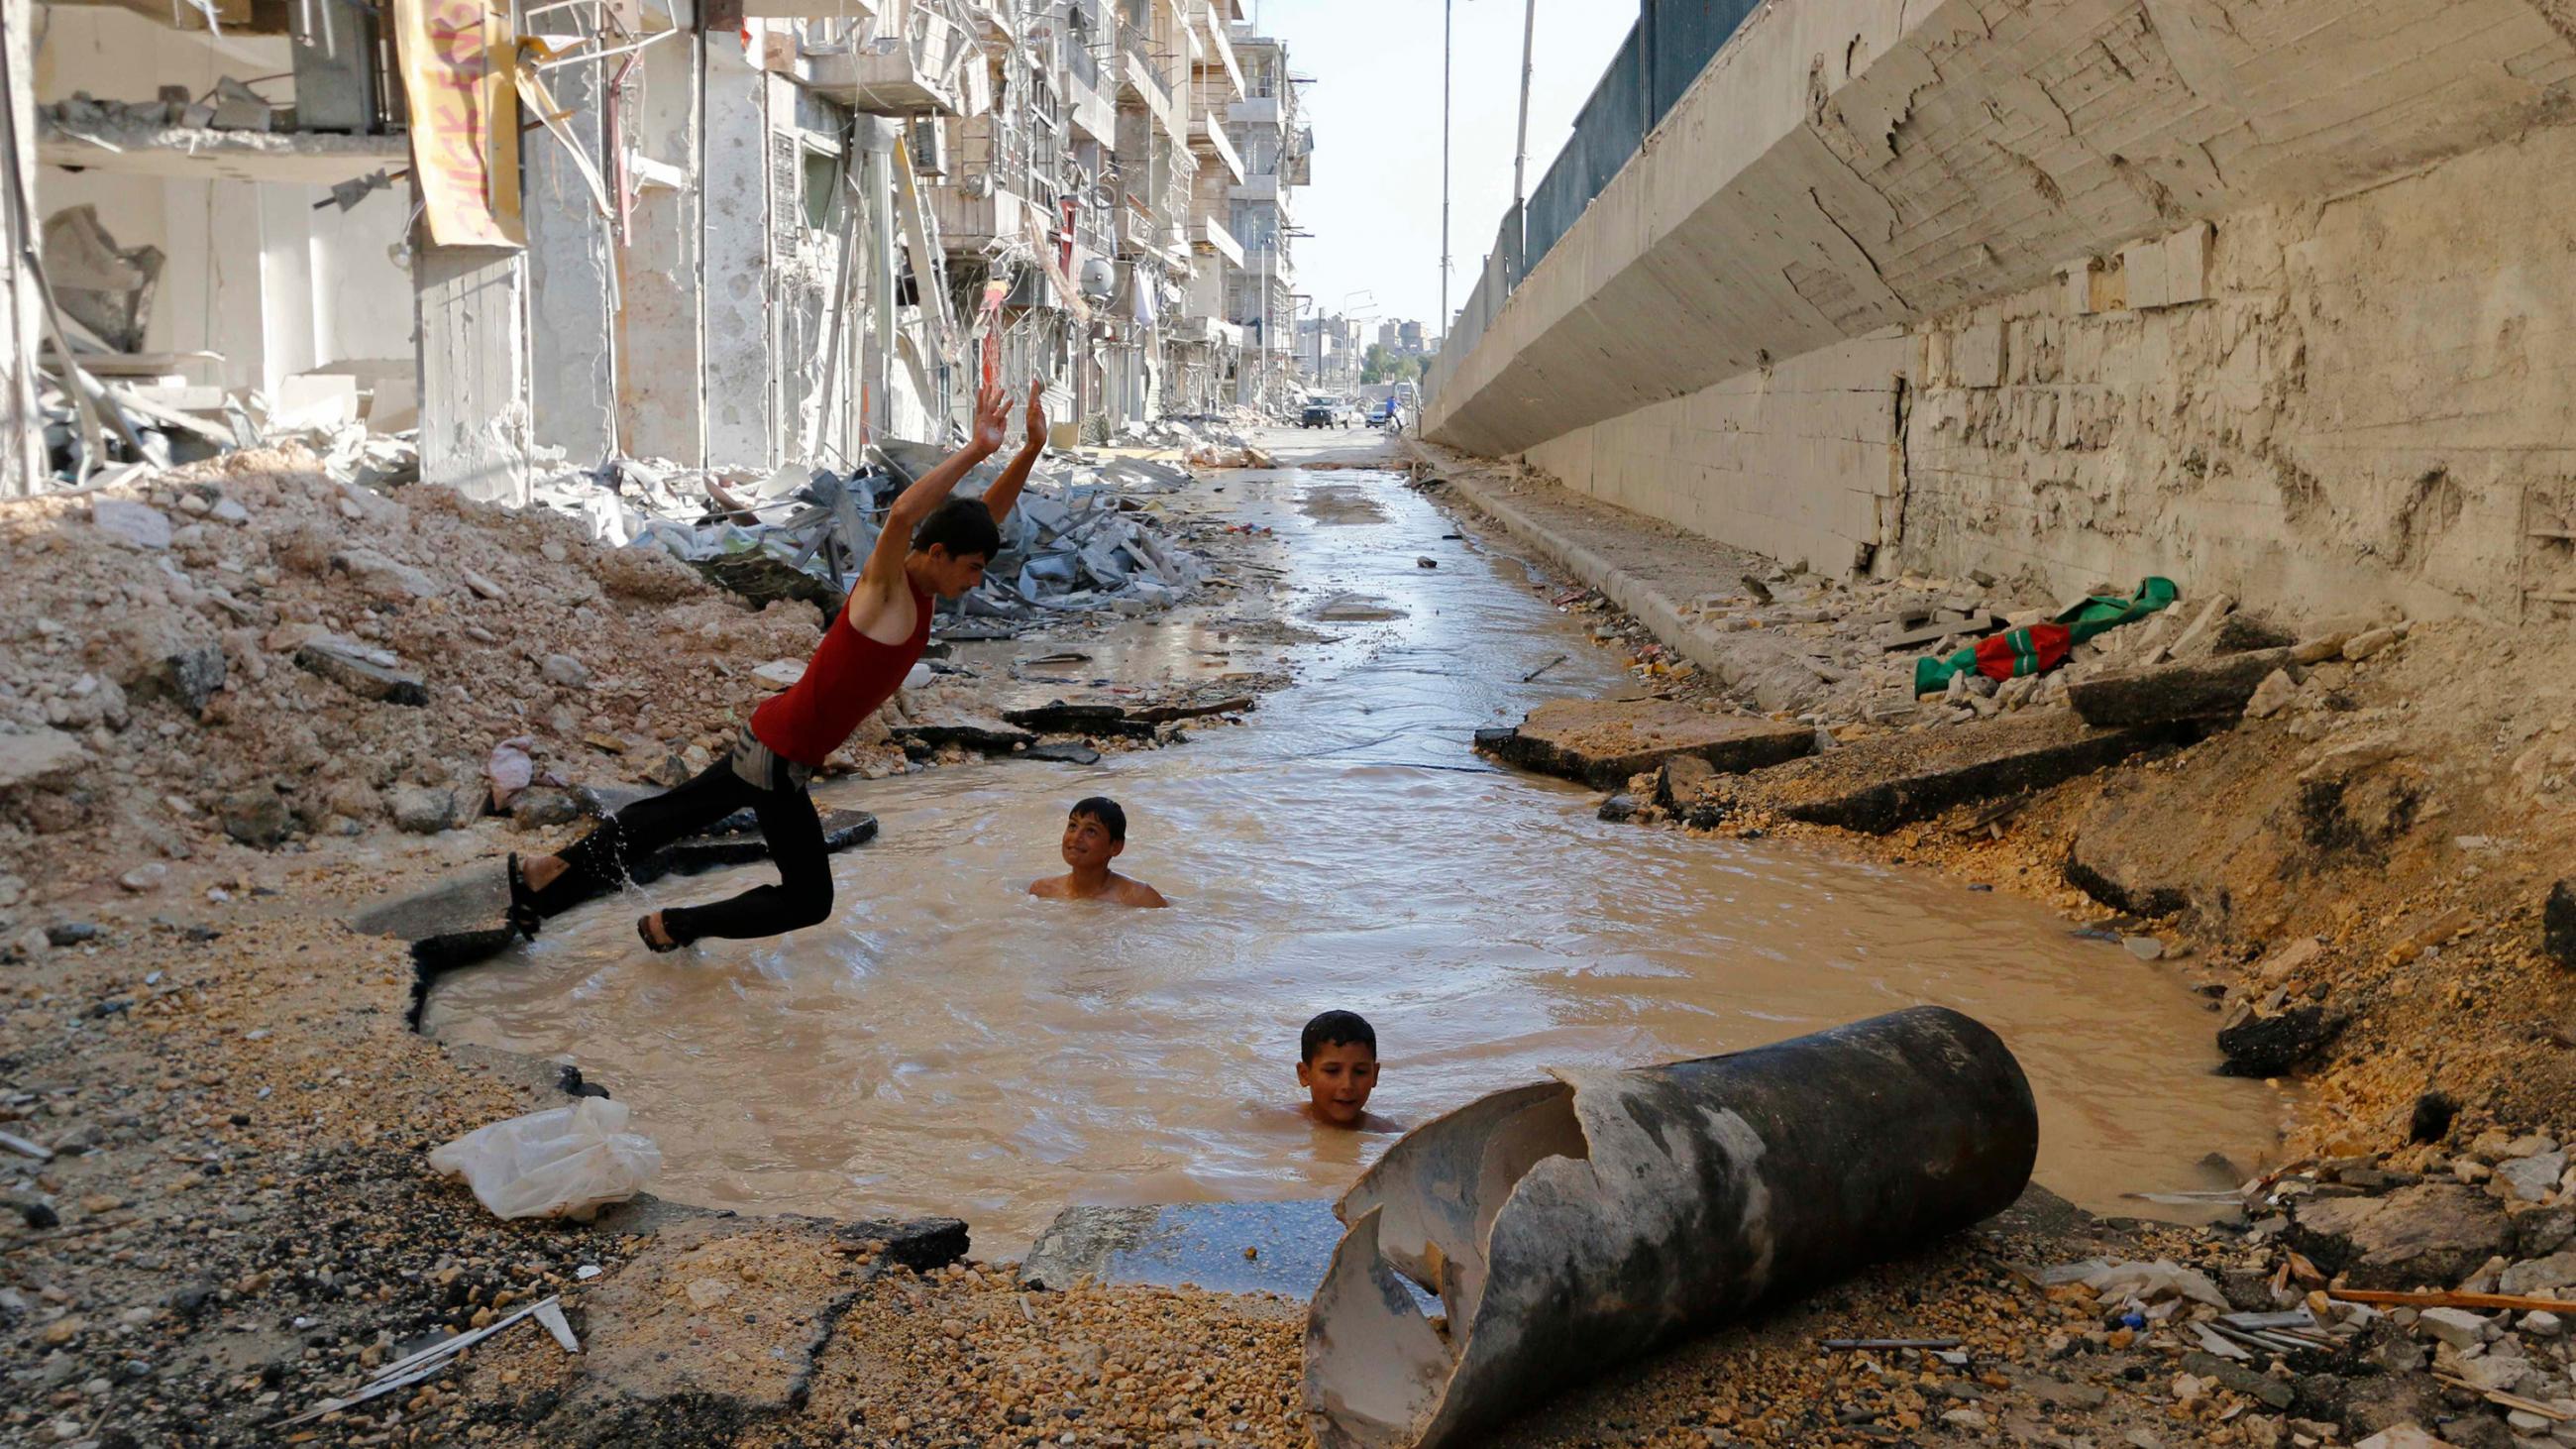 The photo shows a boy leaping in mid-air into a water-filled hole. The water is muddy brown, and two other boys can be seen swimming in the hole with their heads bobbing out. Surrounding them is rubble. This is a powerful image.